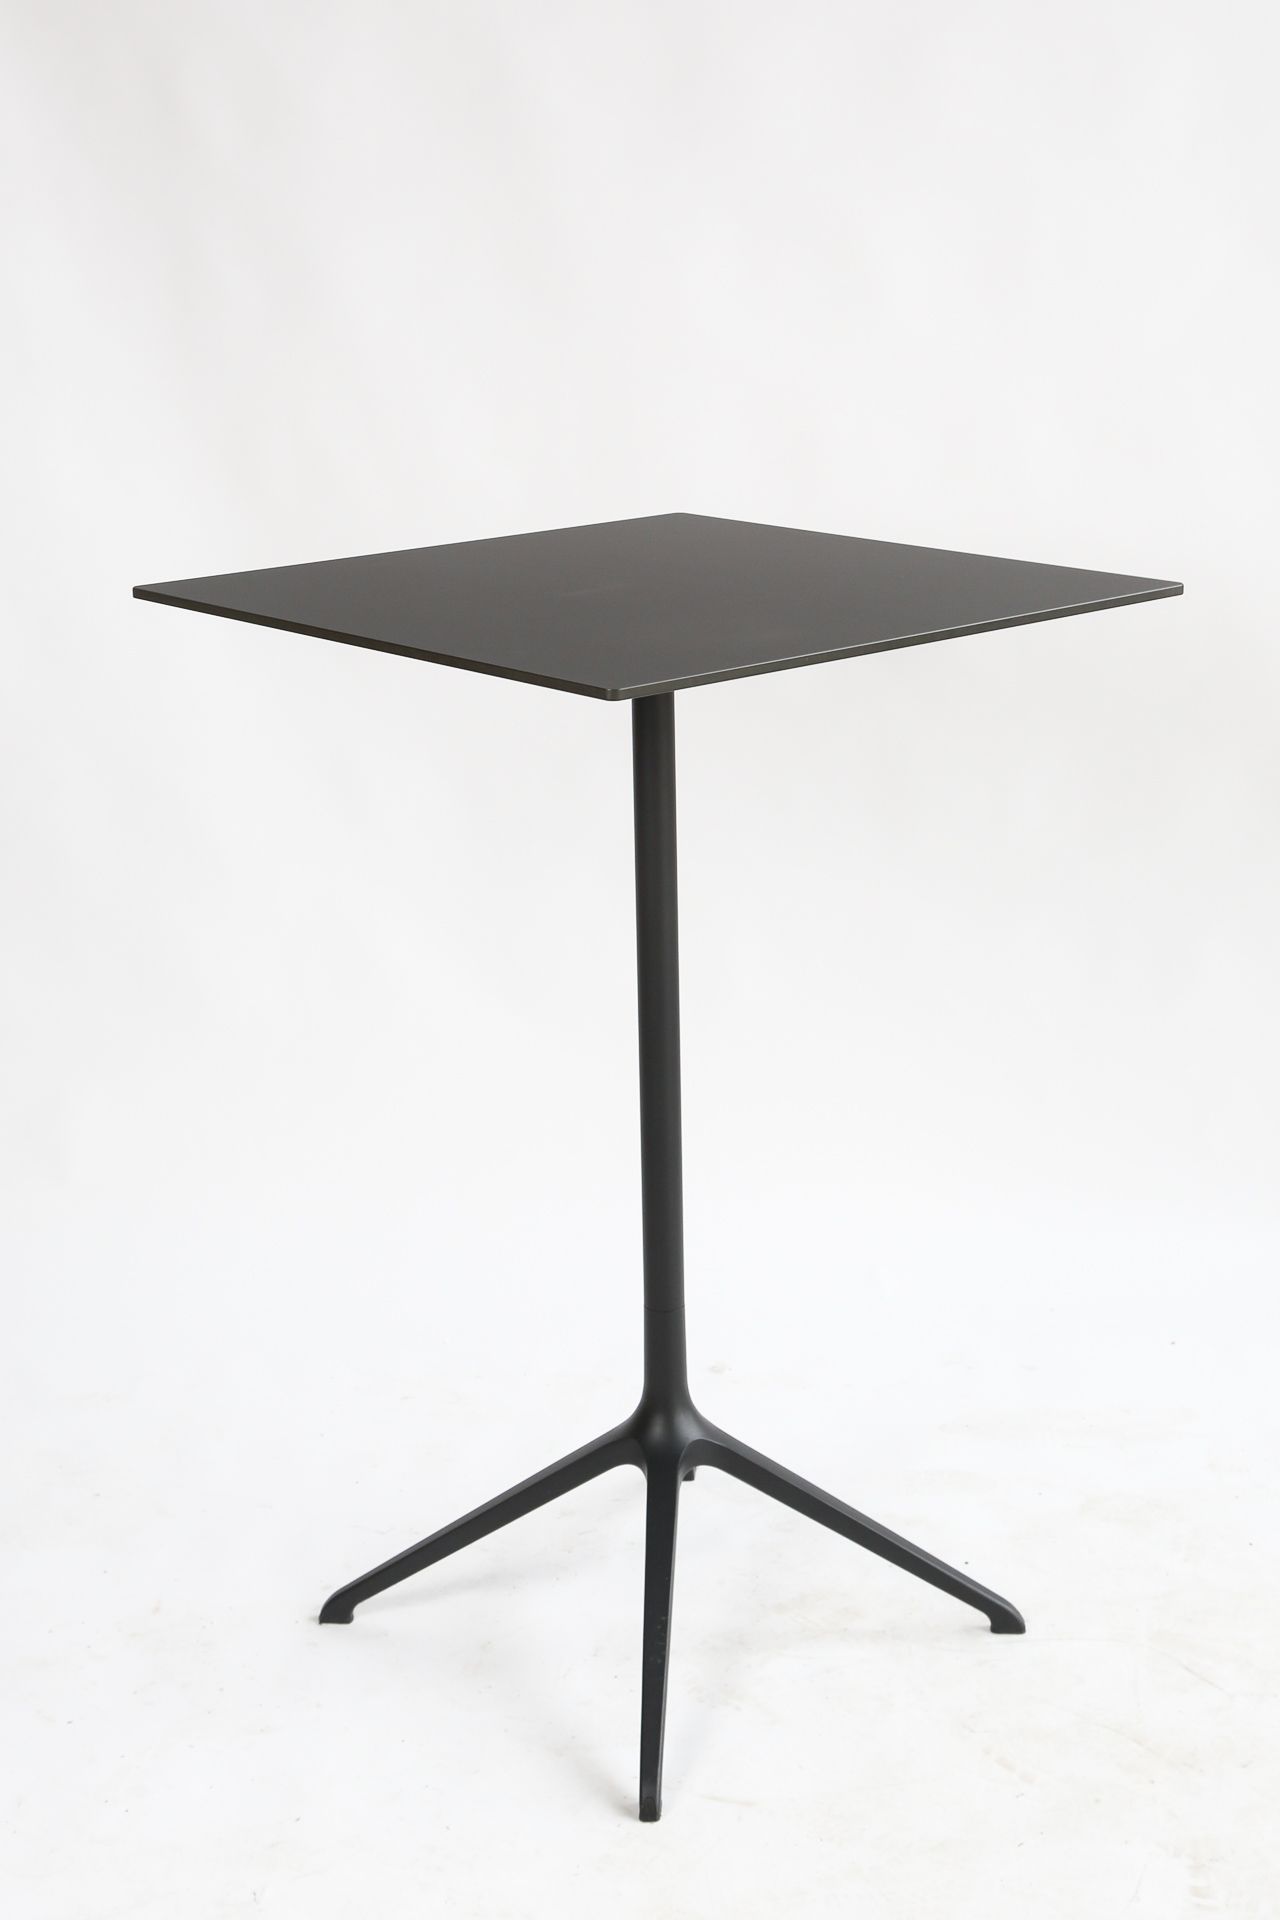 Null KRISTALIA, Elephant folding table - Black, Central base in black lacquered &hellip;